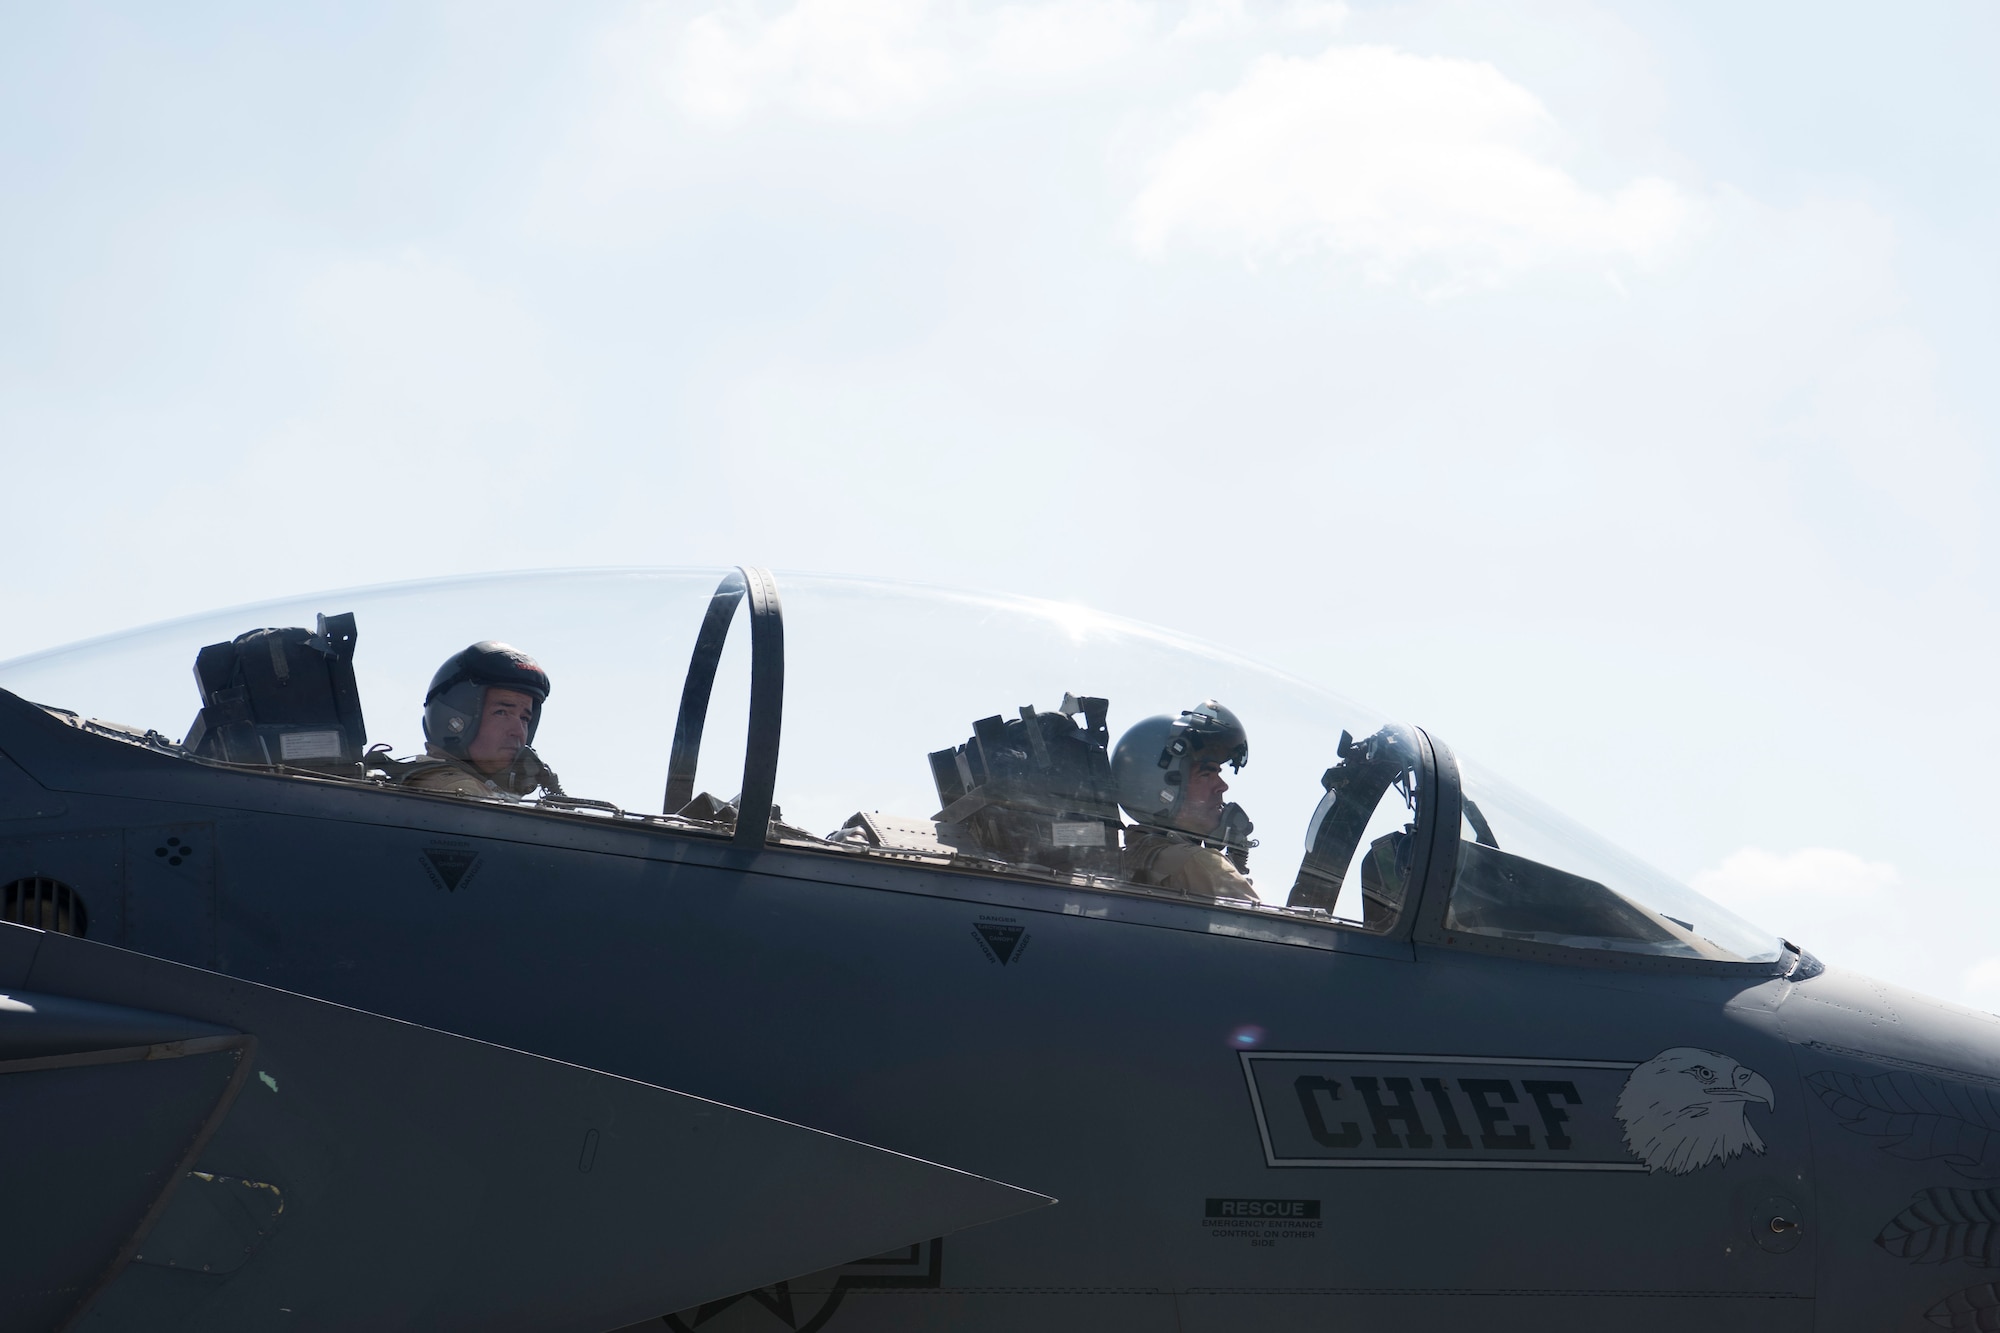 Col. William Marshall (left), 332nd Expeditionary Operations Group commander, and Col. Richard Goodman, 332nd Air Expeditionary Wing vice commander, taxi in an F-15E Strike Eagle, June 2, 2018, at an undisclosed location in Southwest Asia.